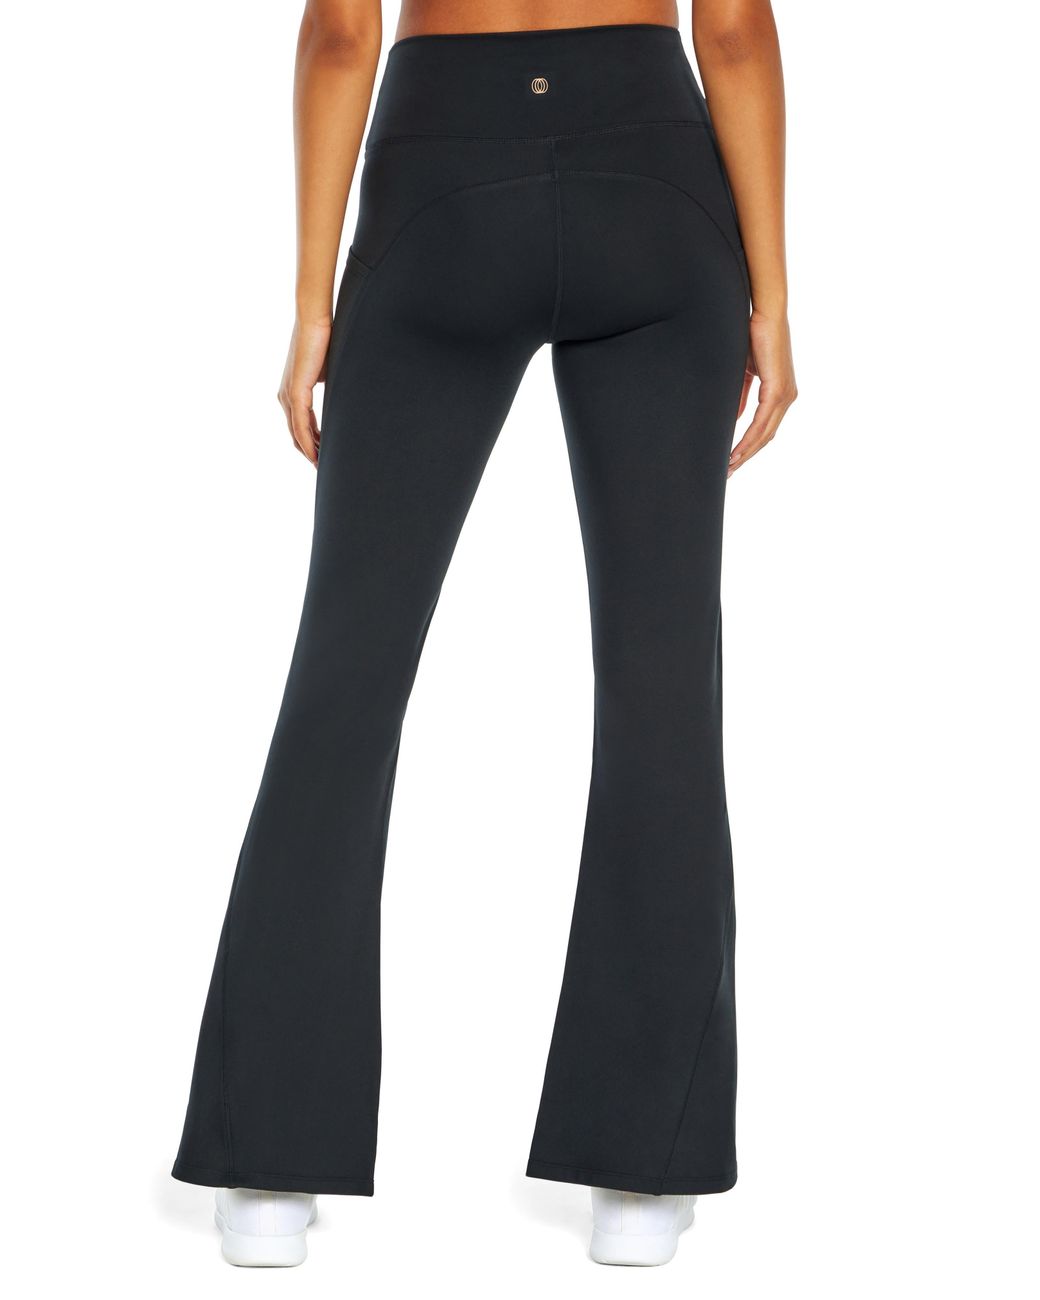 Women's Bootcut Yoga Pants with Pockets - Flare Leggings for Women